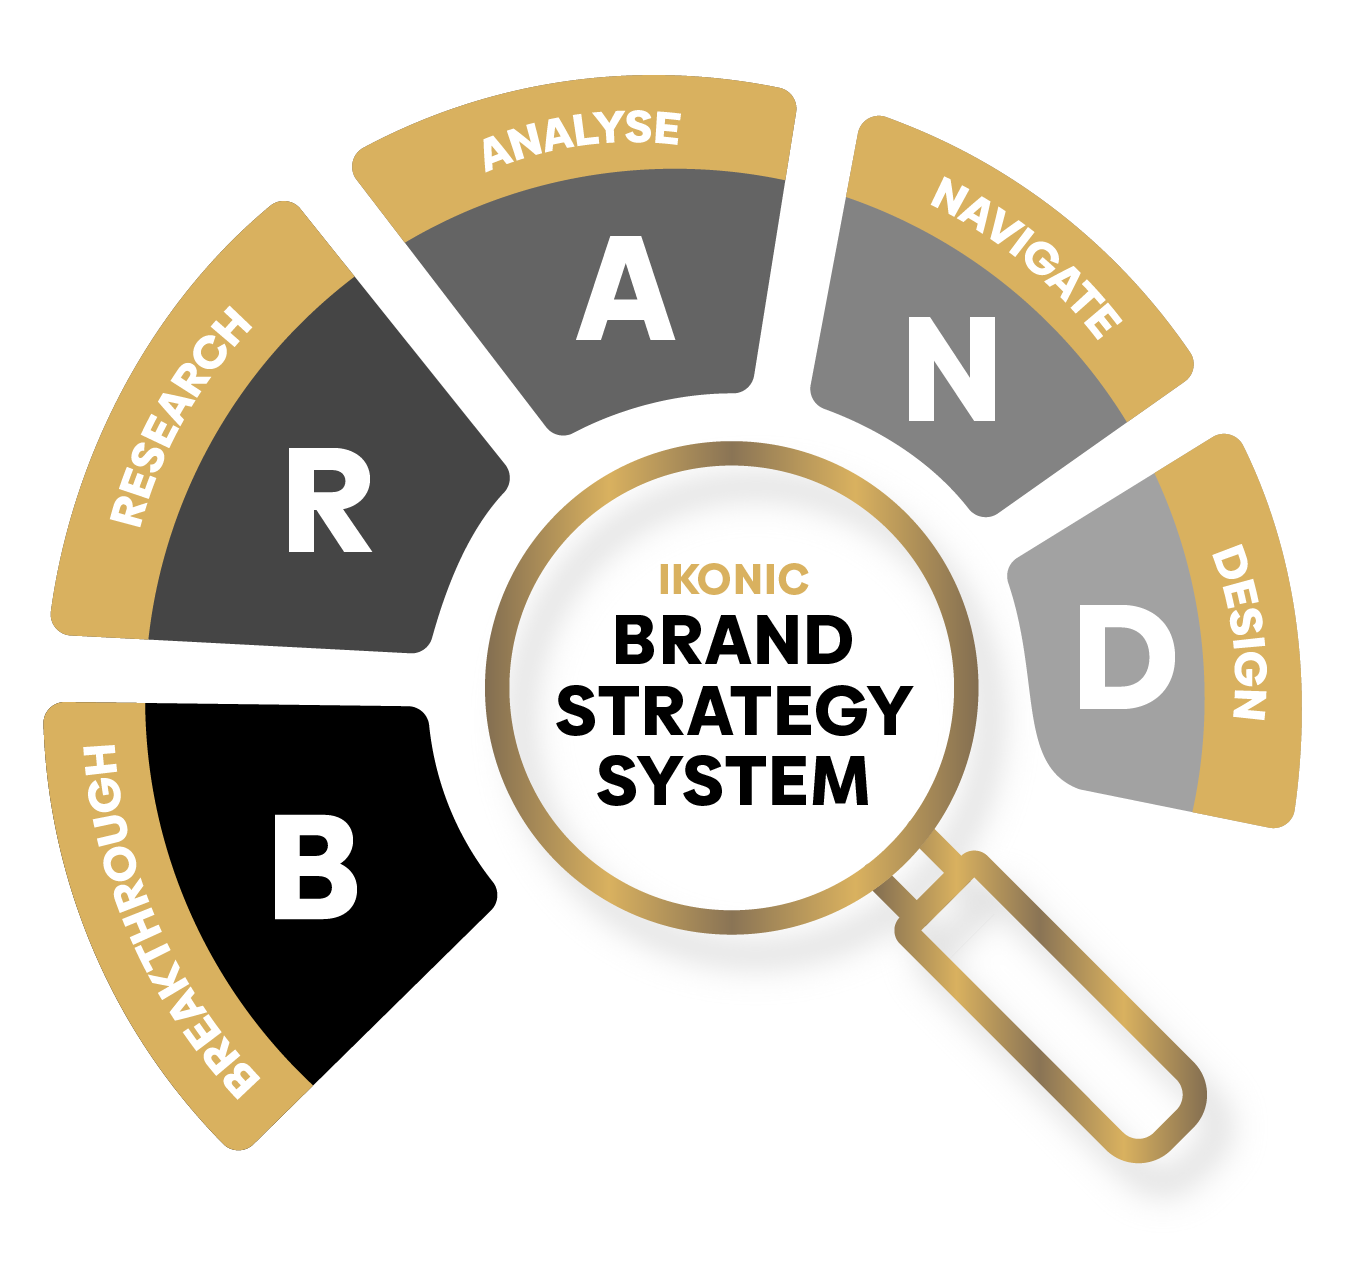 IKONIC Brands: The Brand Strategy System